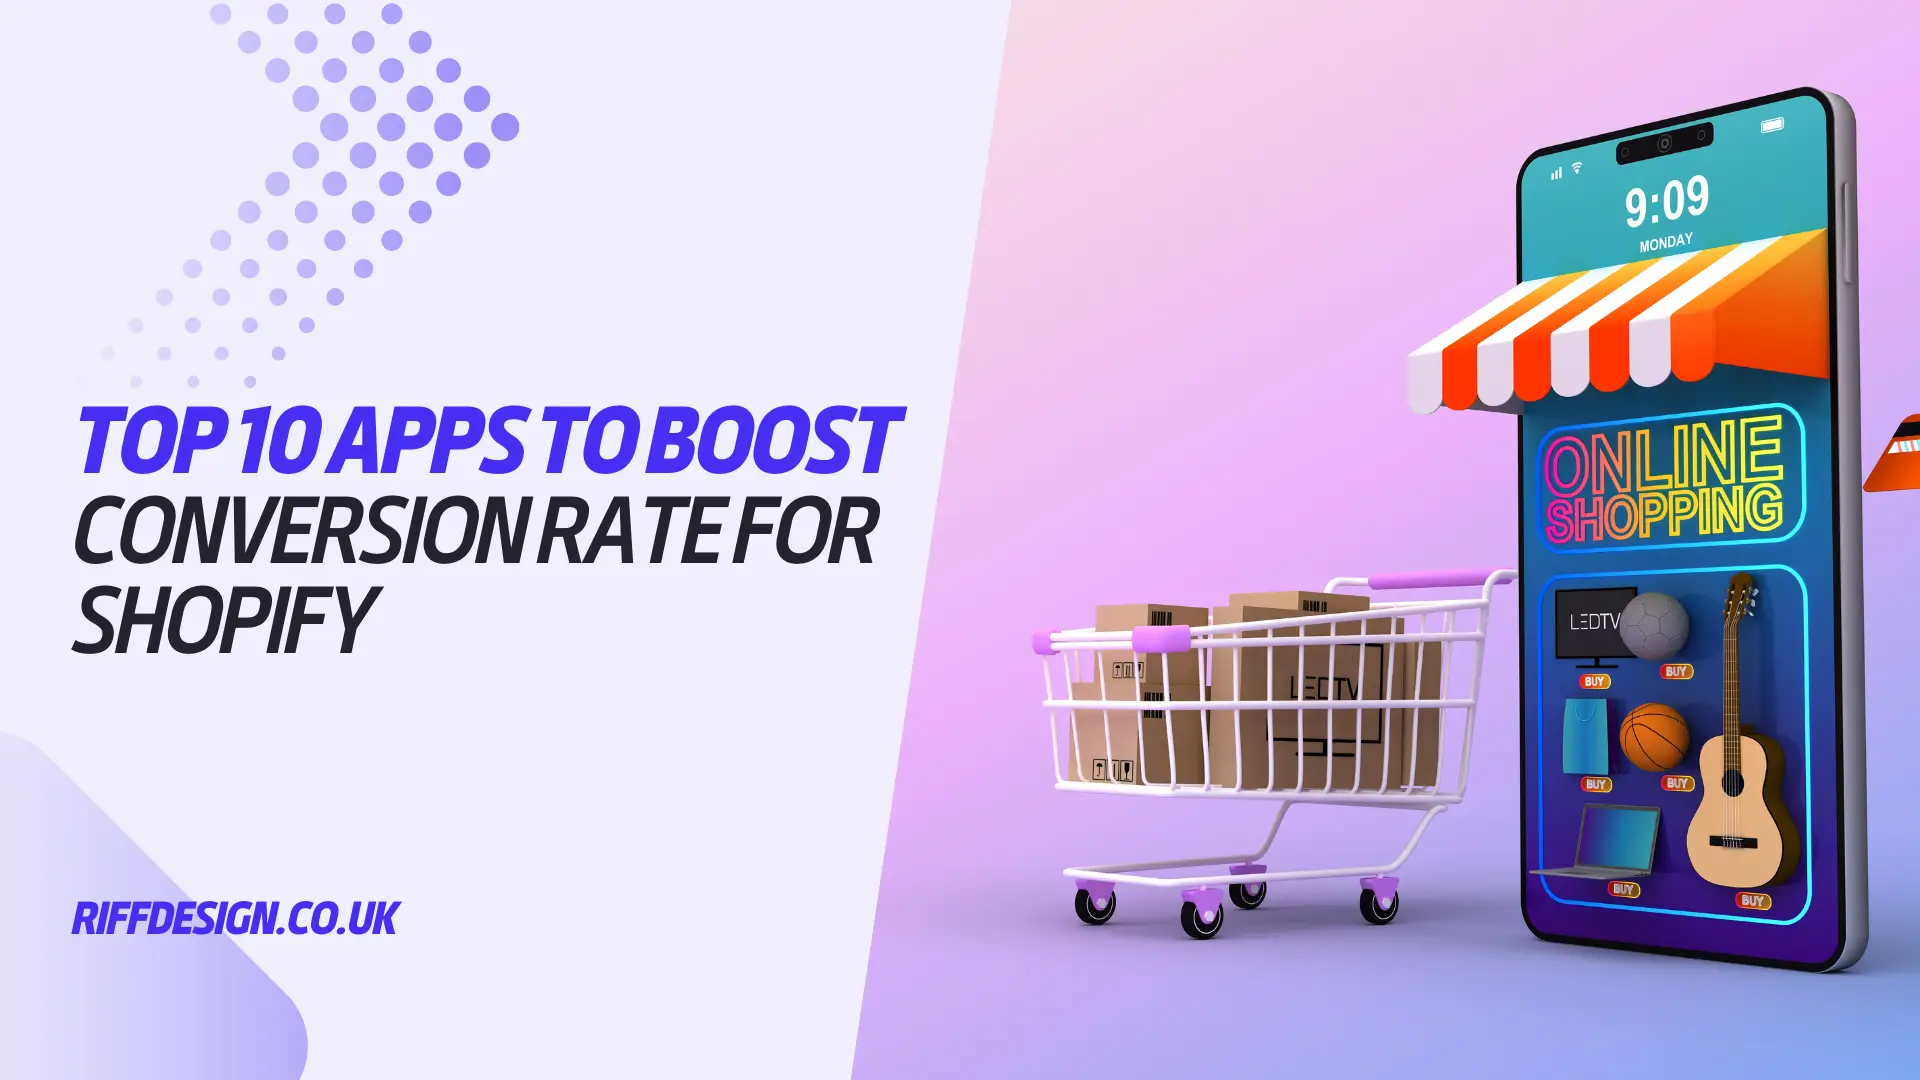 Apps to Boost Conversion Rates for Shopify